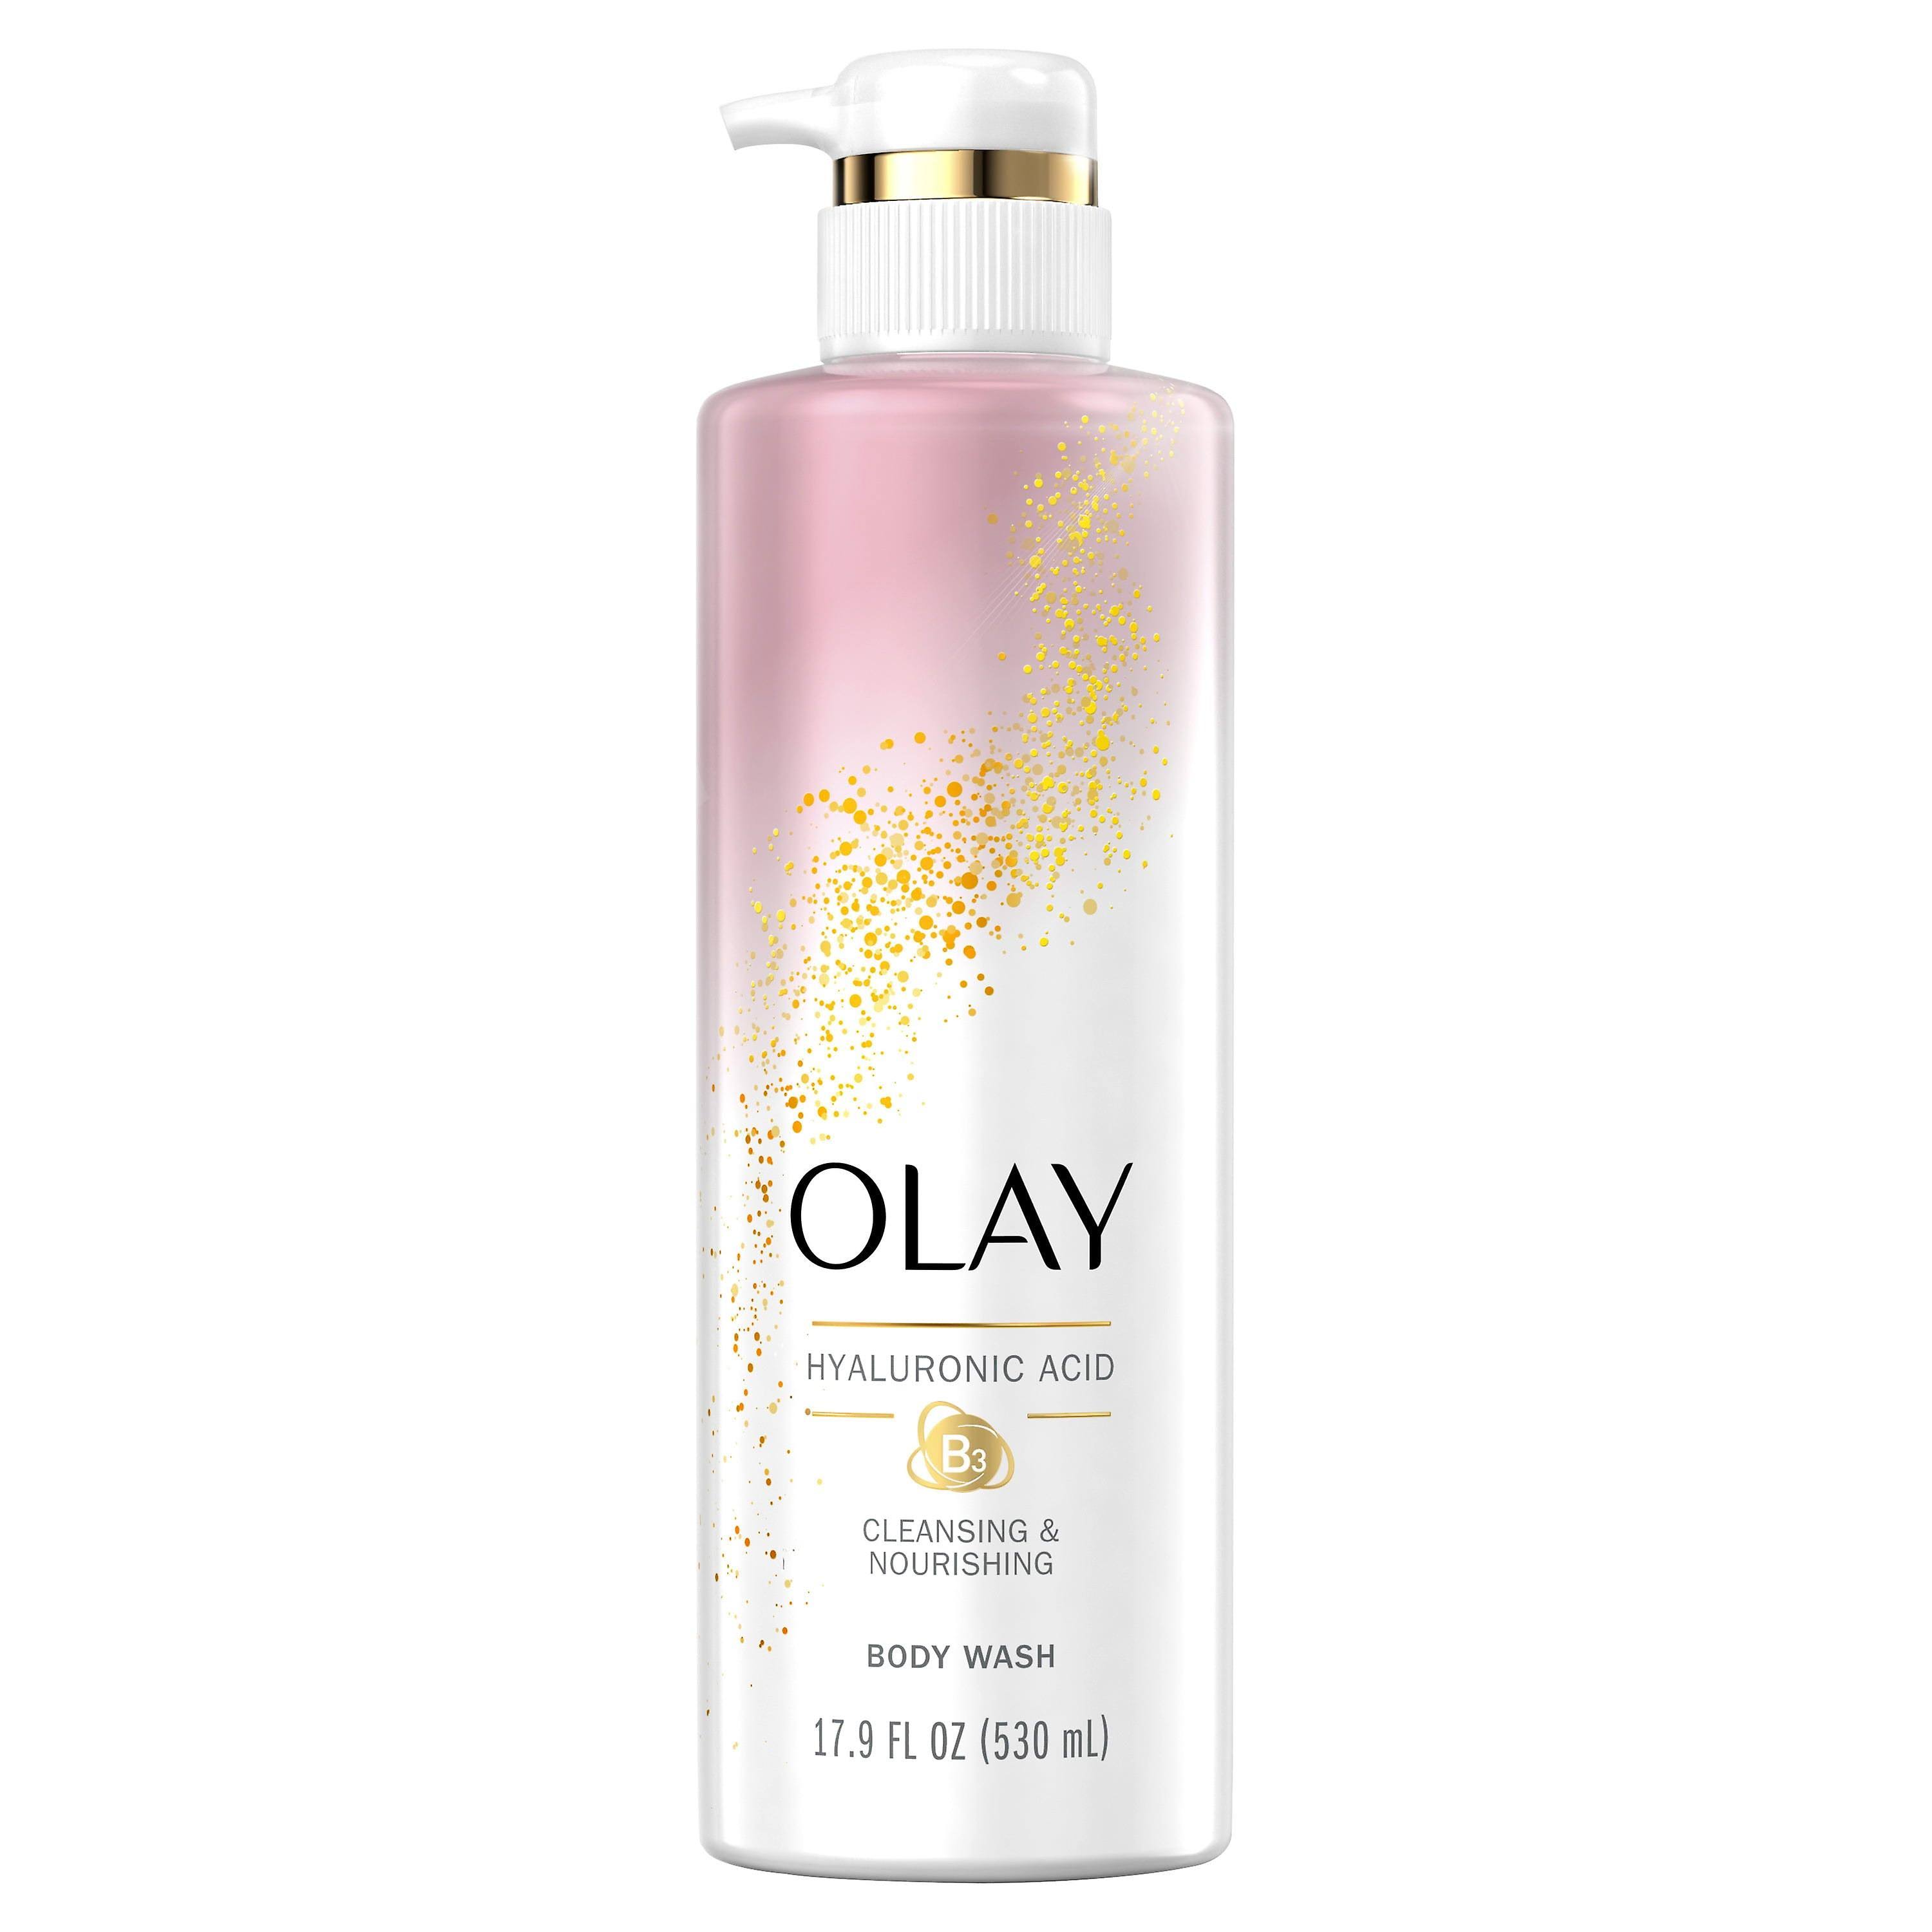 Olay Cleansing & Nourishing Body Wash With Vitamin B3 and Hyaluronic Acid, 530 ml